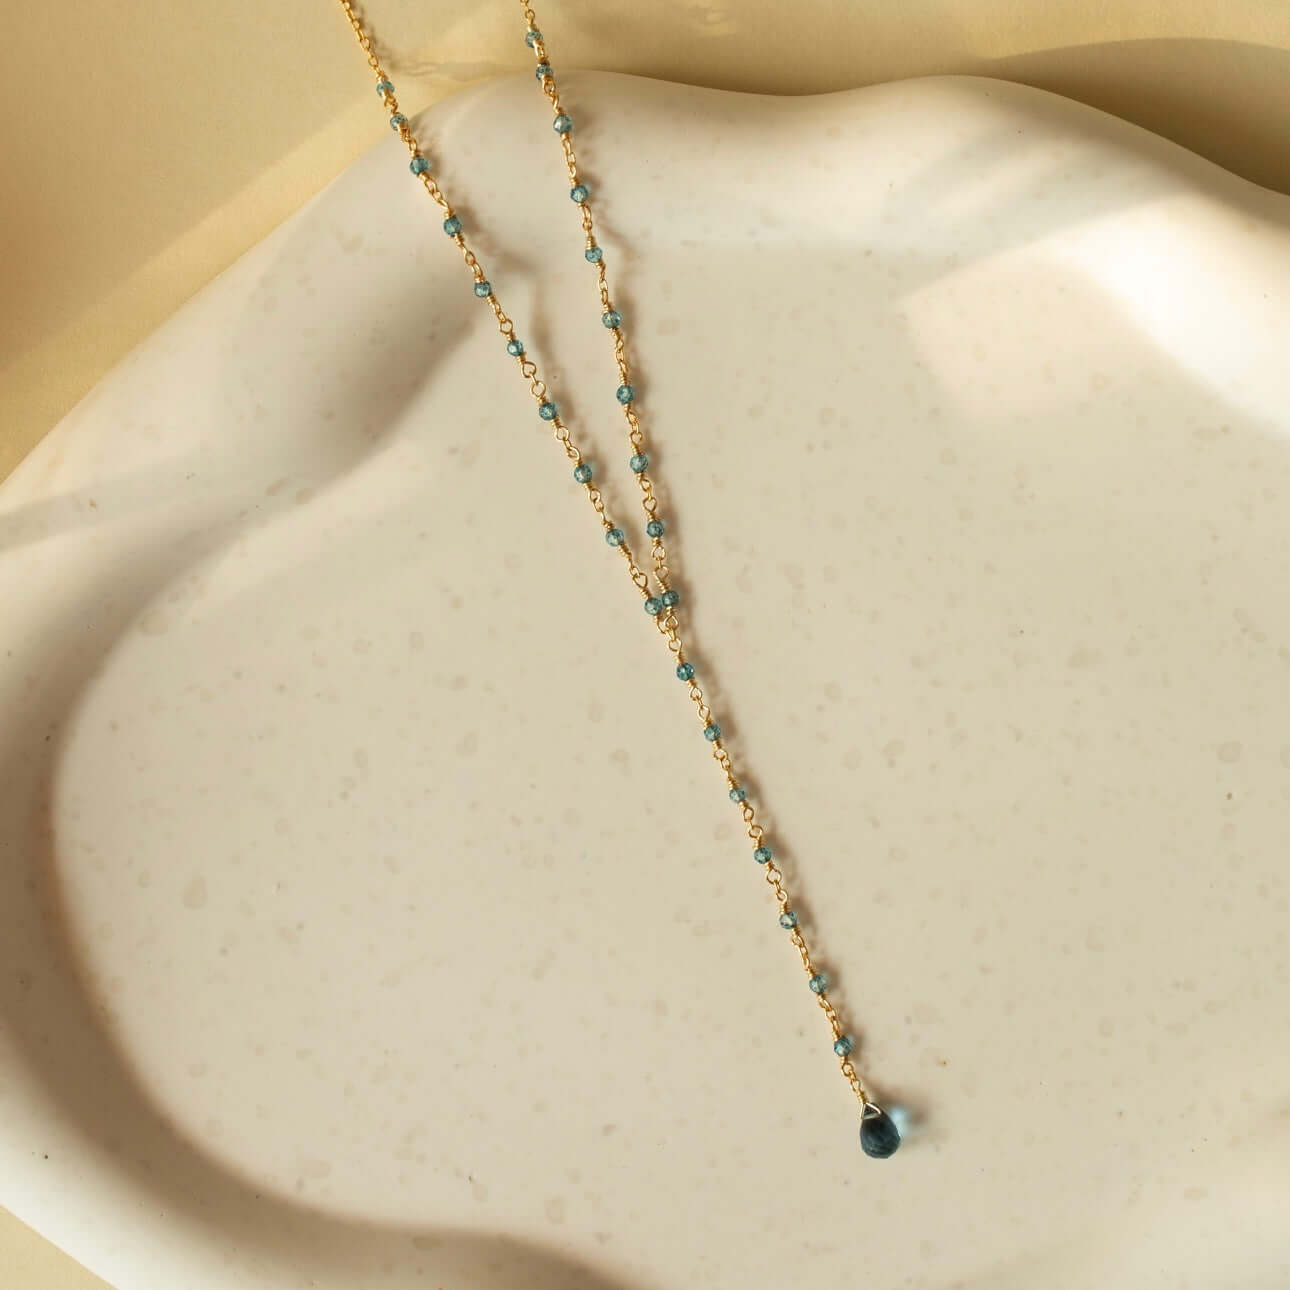 Lolite necklace on clay—a calm and charming touch of blue.